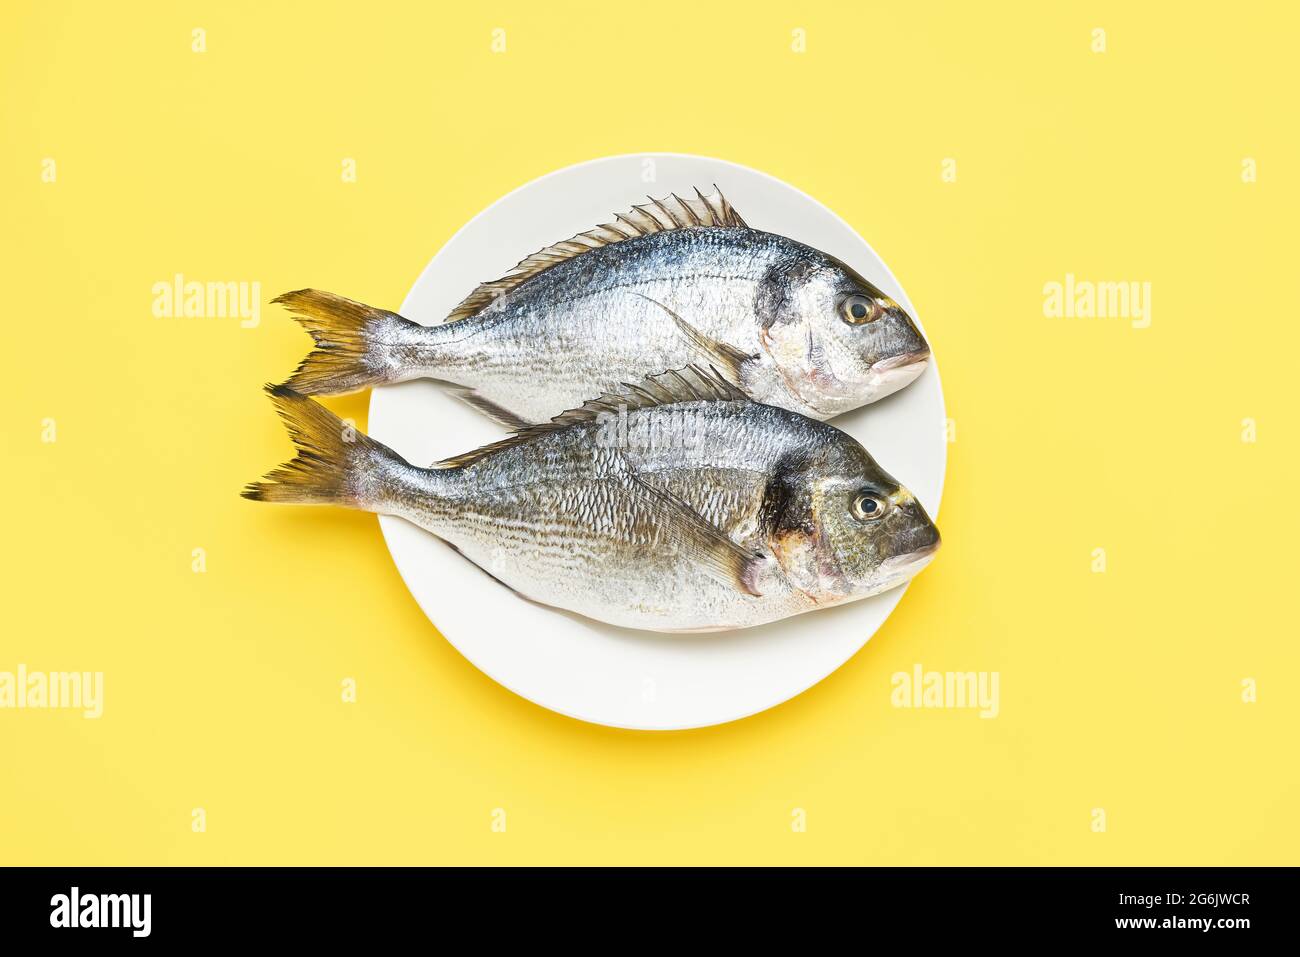 Two raw dorado fish on white plate on a bright yellow background. Mediterranean seafood concept. Top view, copy space for text Stock Photo